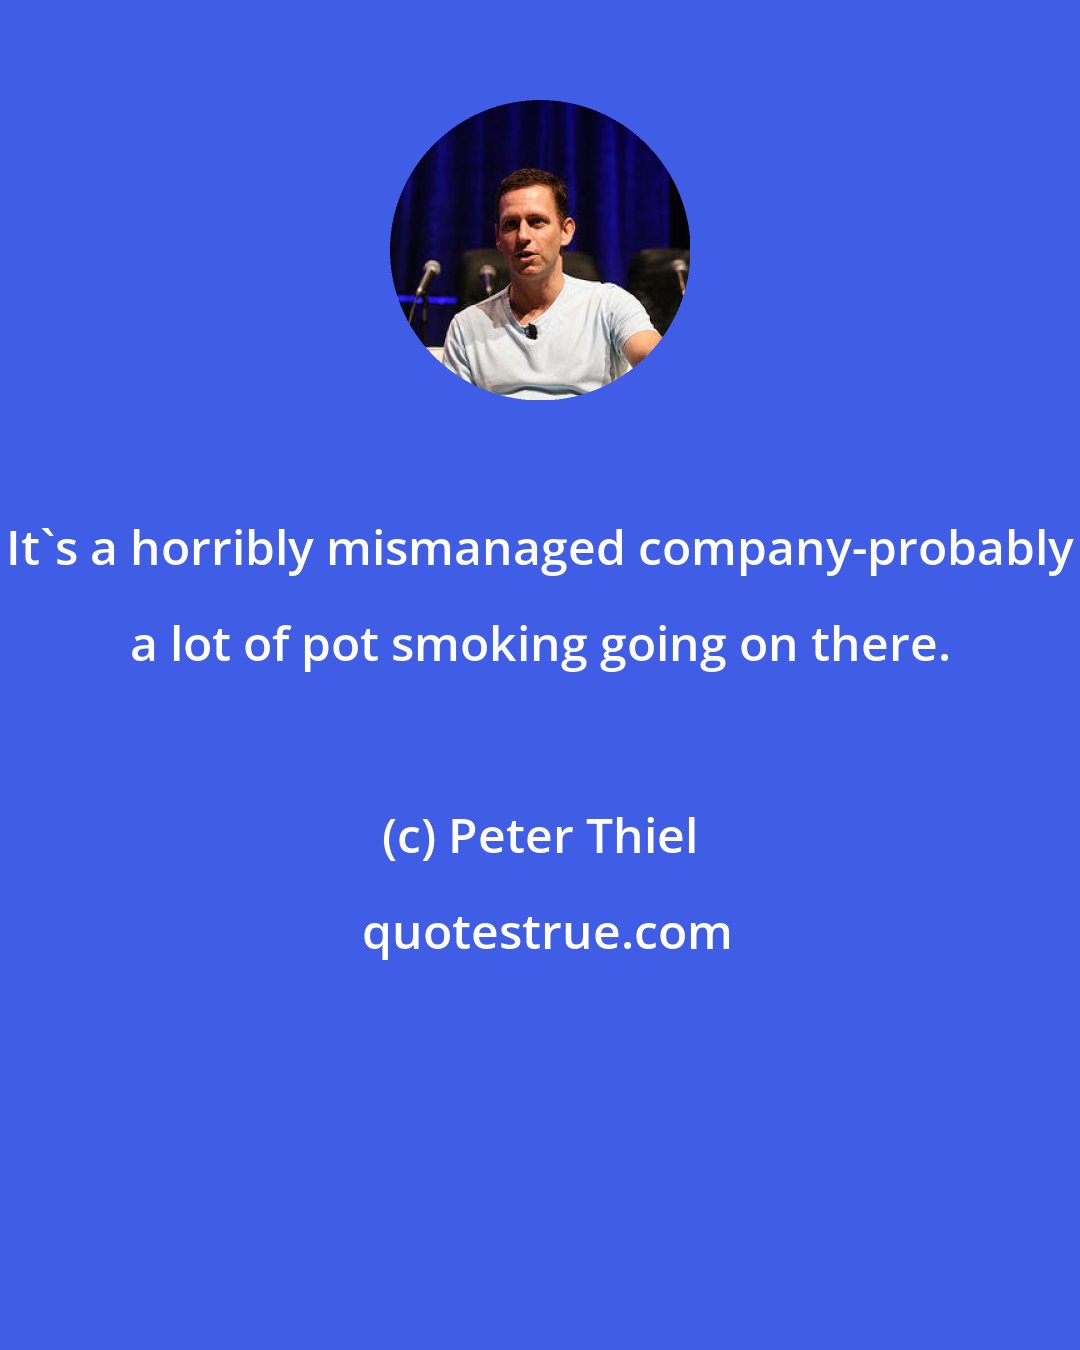 Peter Thiel: It's a horribly mismanaged company-probably a lot of pot smoking going on there.